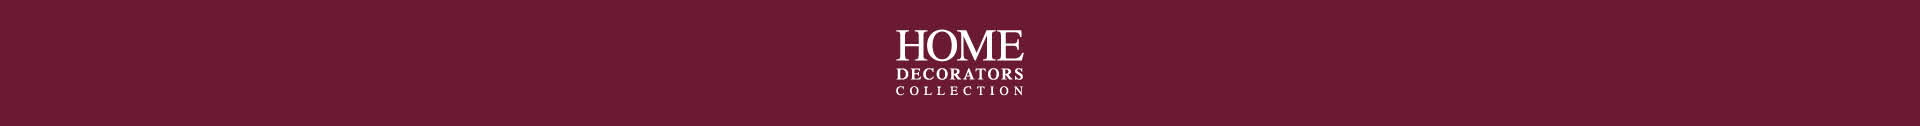 Home Decorators Collection Brand Banner